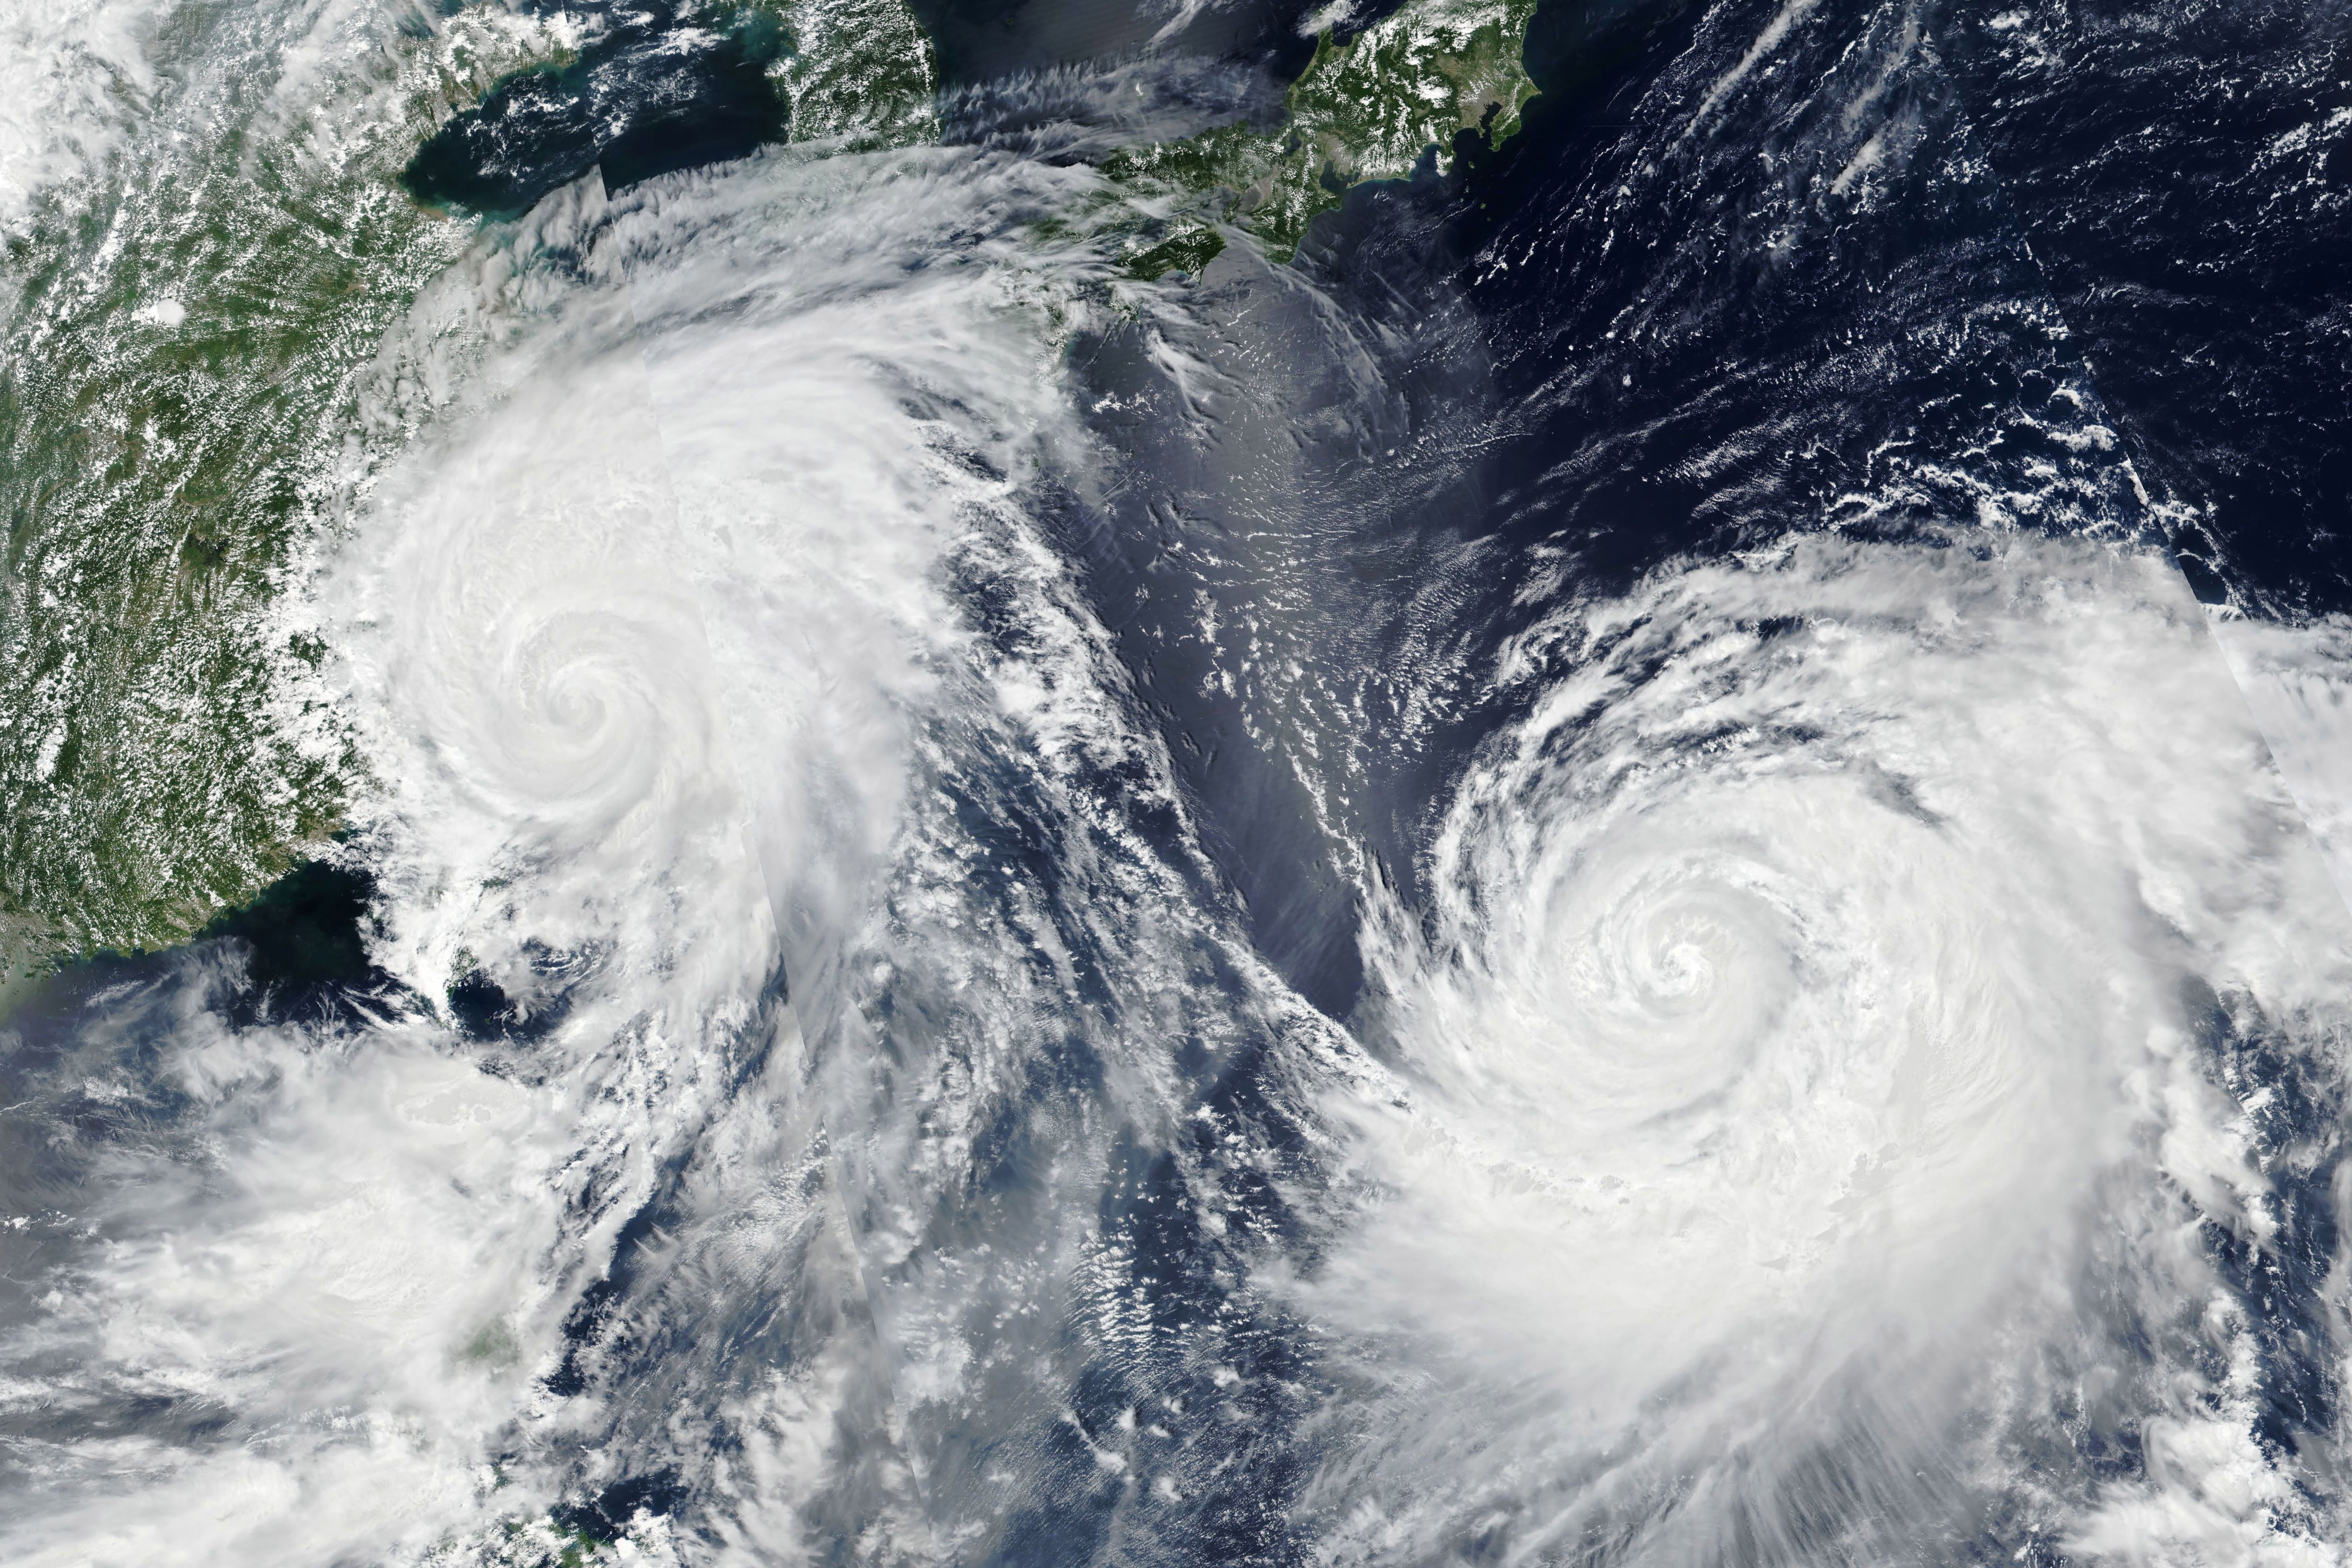 epa07765366 A handout photo made available by NASA Earth Observatory shows a satellite image of Typhoon Lekima (L) and Typhoon Krosa (R) crossing the Western Pacific Ocean, 09 August 2019, threatening East Asian countries with destructive winds and rain. Typhoon Lekima made landfall near Shitangzhen, in China's Zhejiang province on 10 August 2019 at around 1 a.m. local time. Chinese authorities on 09 August issued a red alert warning residents of strong winds, heavy rainfall and coastal impacts threats in anticipation of the typhoon's landfall. Meanwhile Typhoon Krosa continues to follow a northerly path toward Japan, but its forecasted track remains uncertain.  EPA/NASA EARTH OBSERVATORY HANDOUT  HANDOUT EDITORIAL USE ONLY/NO SALES